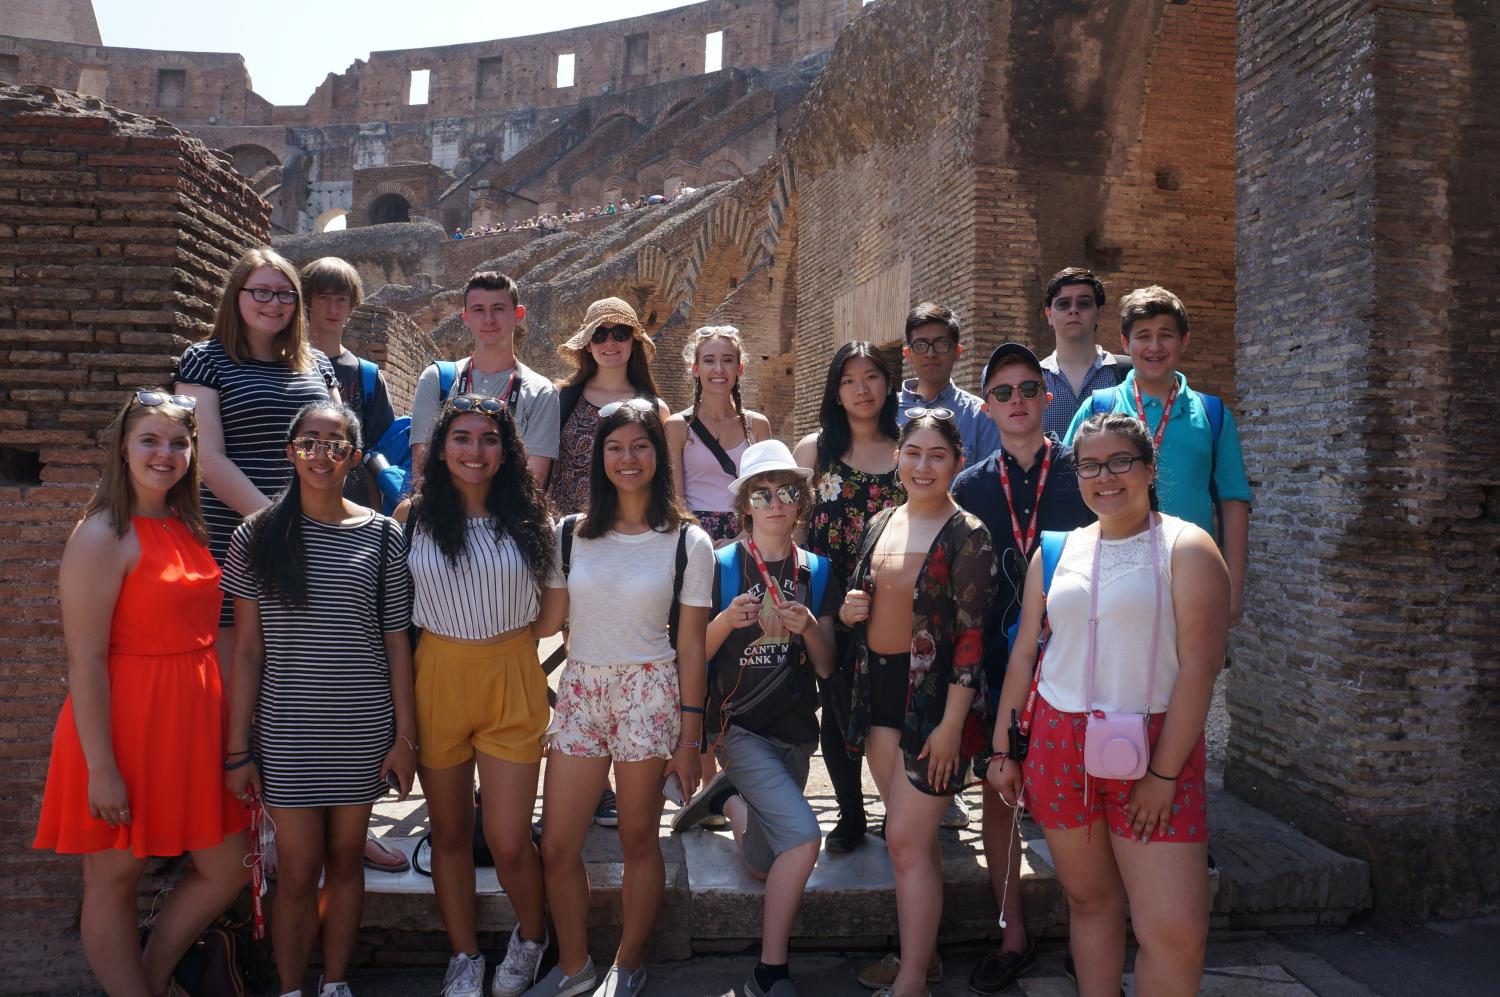 A+full+group+photo+of+the+students+at+the+Colosseum+in+Rome%2C+Italy.